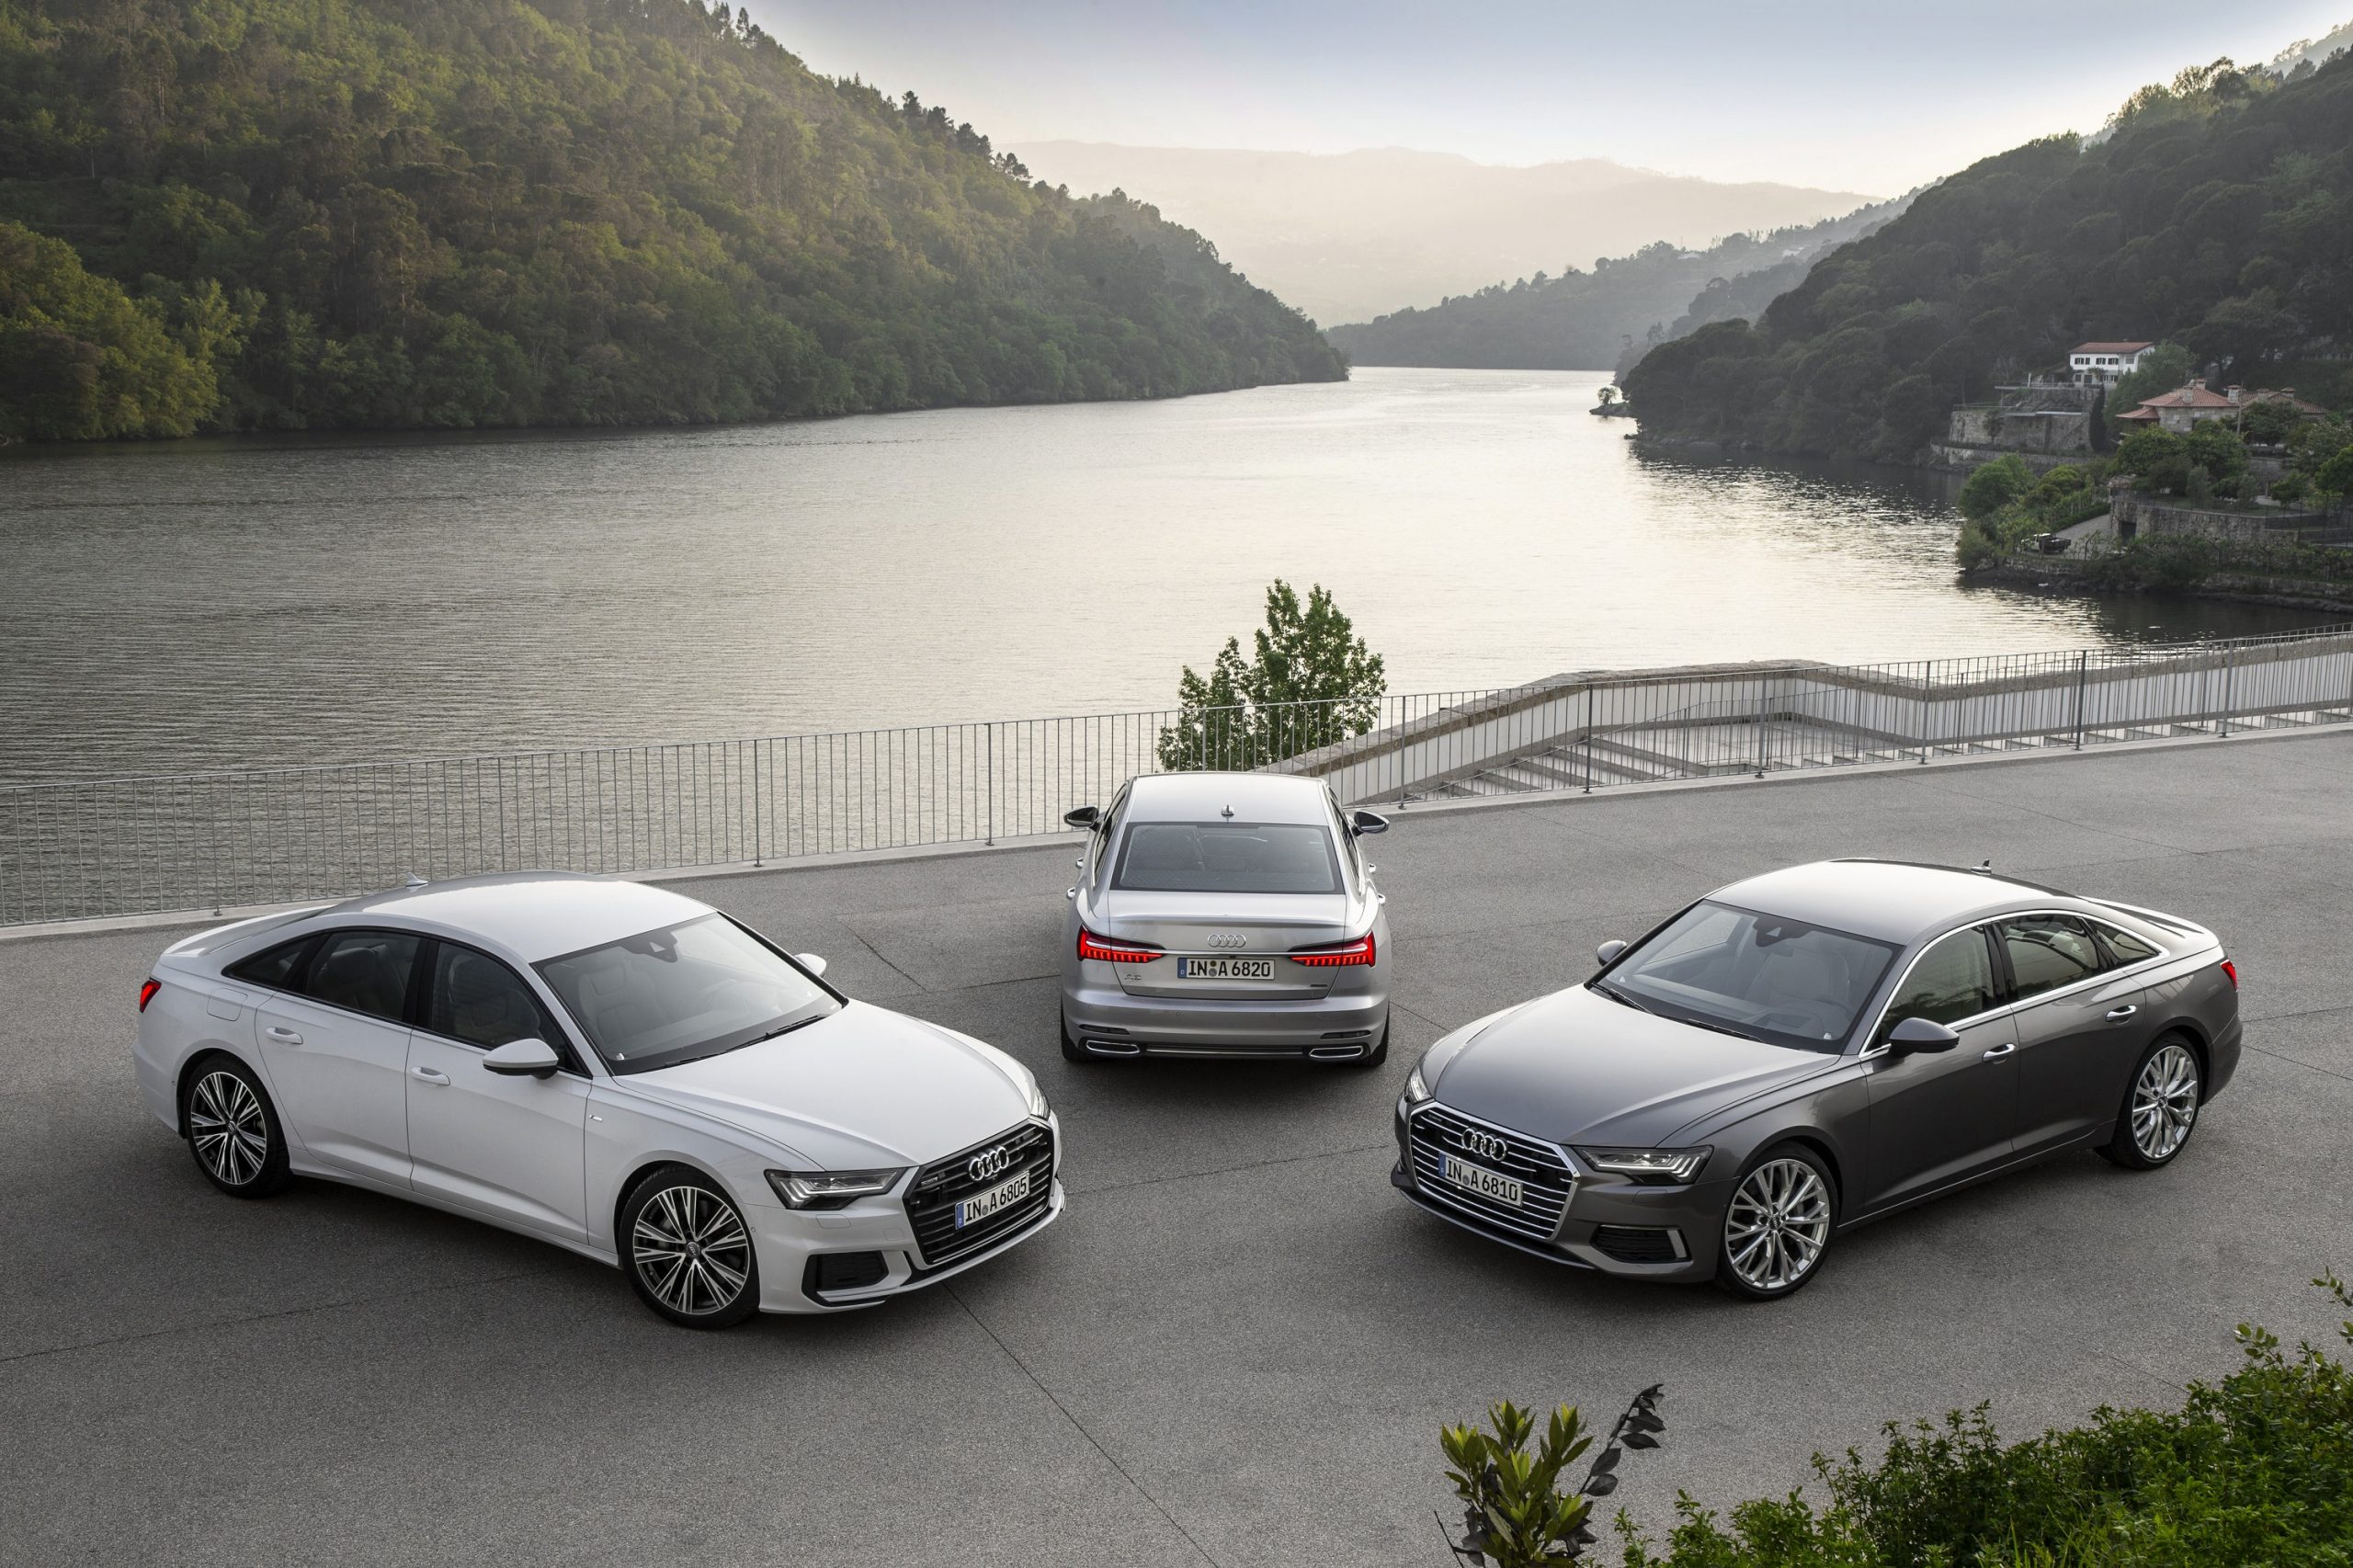 A trio of silver and grey Audi A6 sedans by a lake